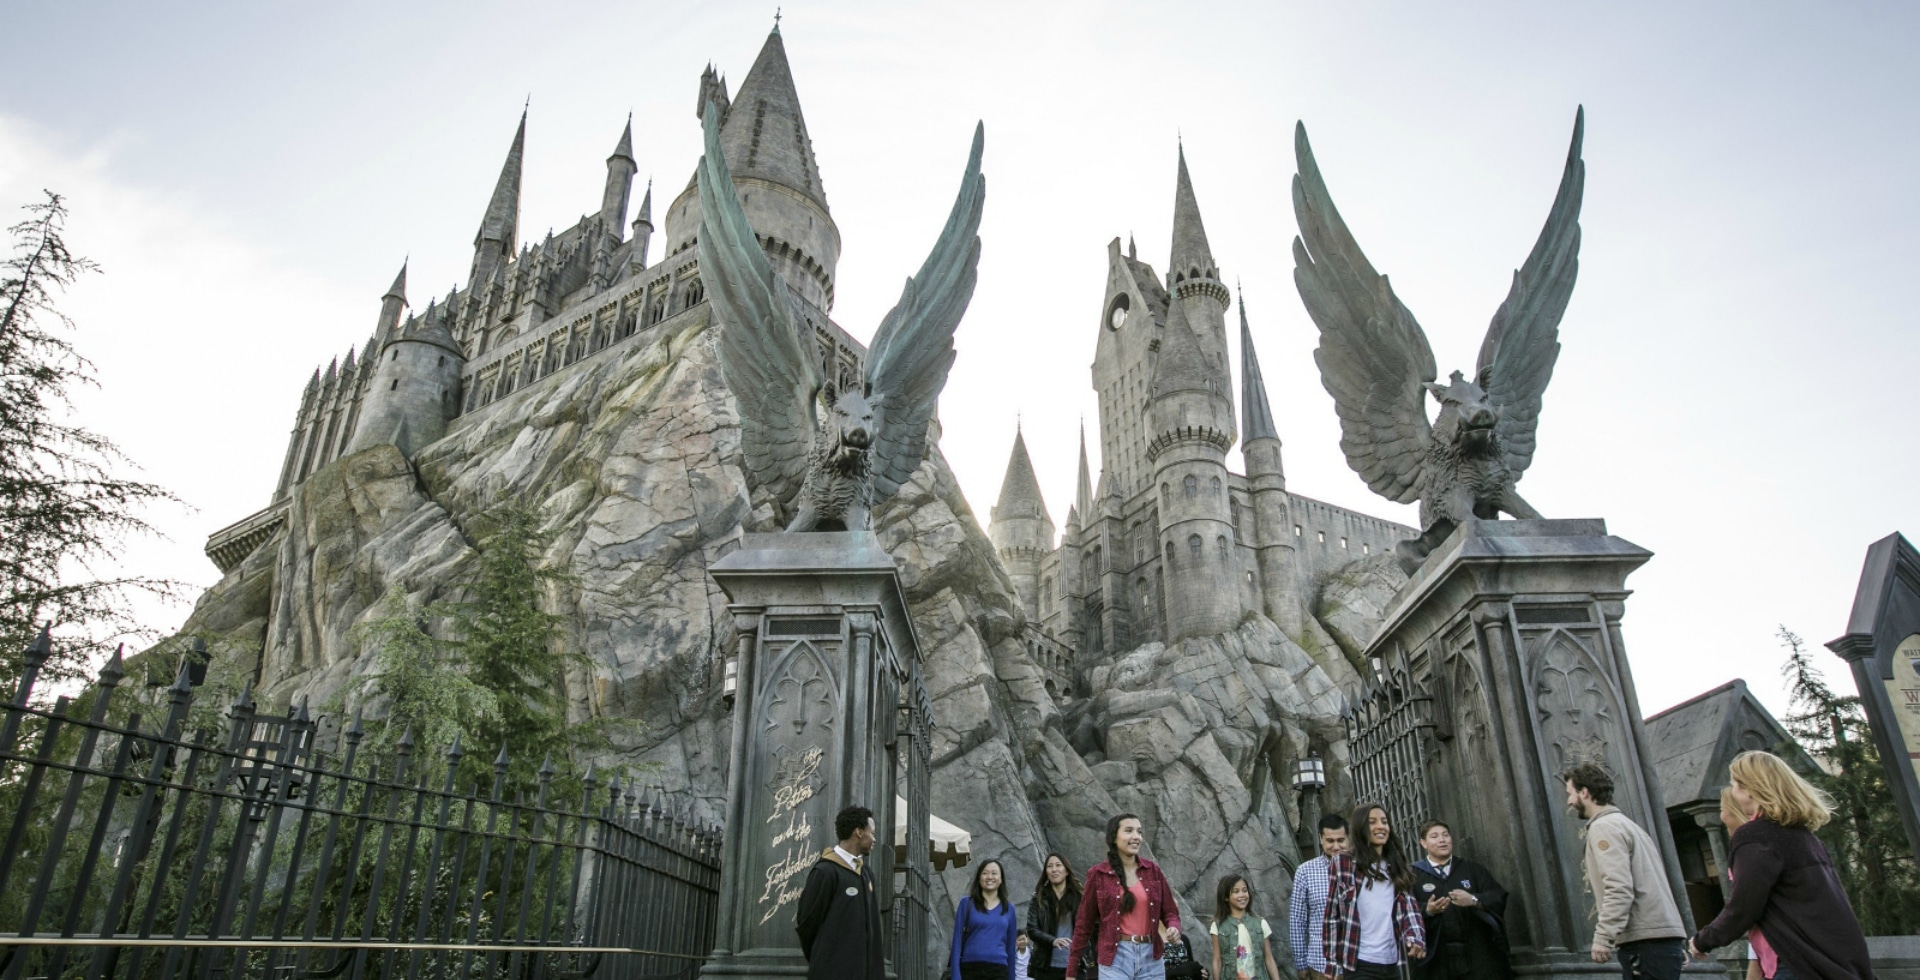 Tour the Wizarding World of Harry Potter in Hollywood